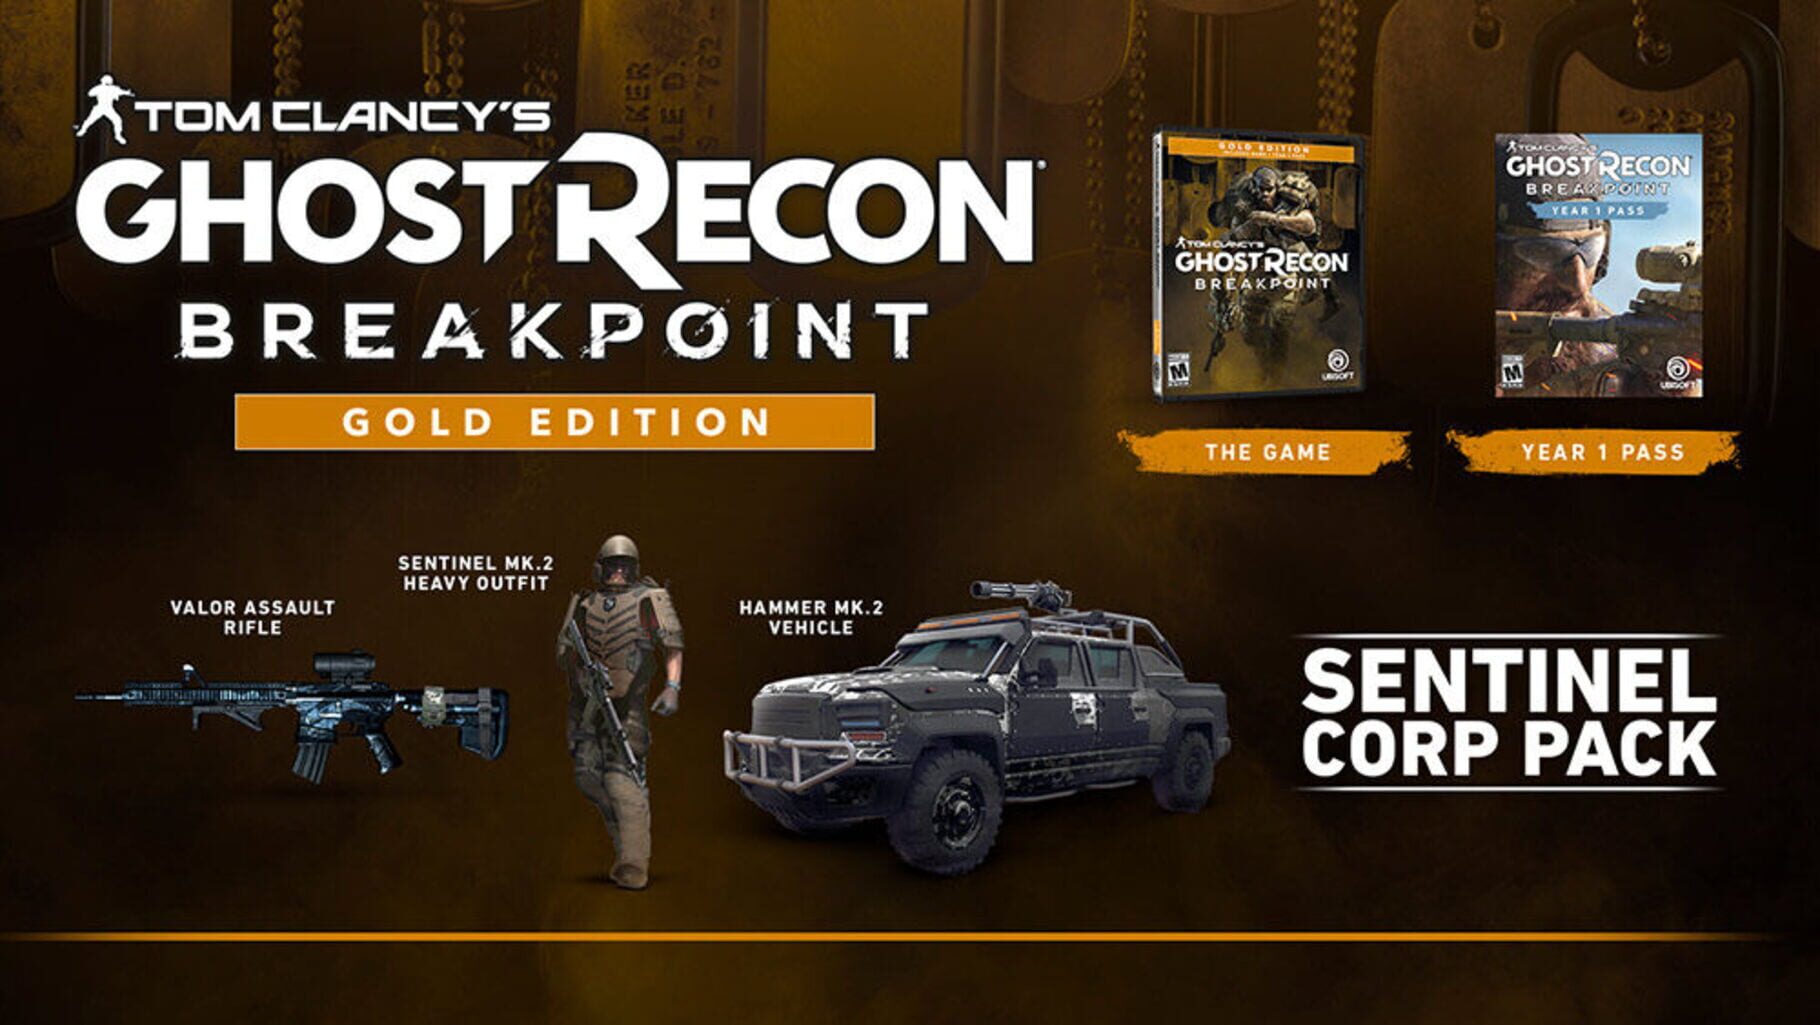 Arte - Tom Clancy's Ghost Recon: Breakpoint Gold Edition